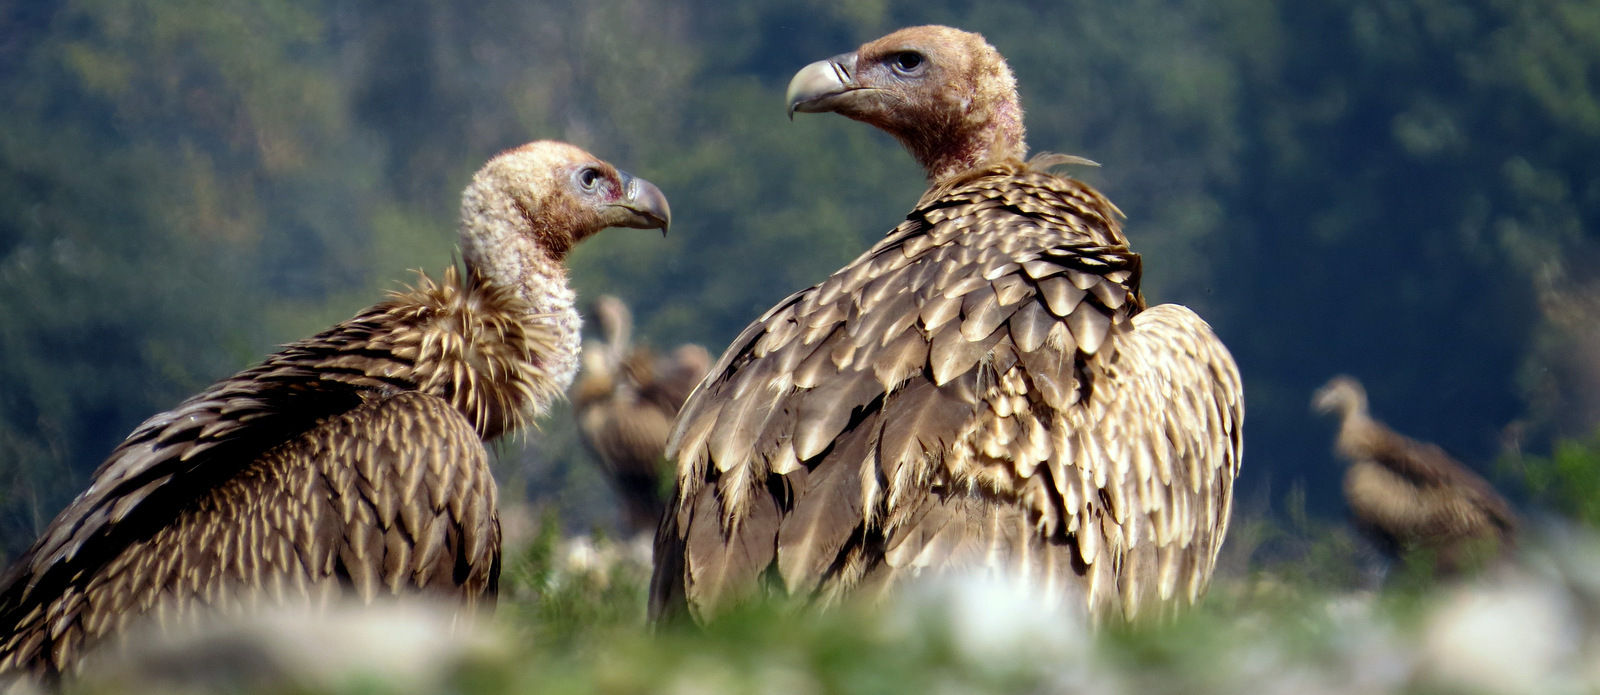 Losses of vultures can allow other scavengers to flourish.